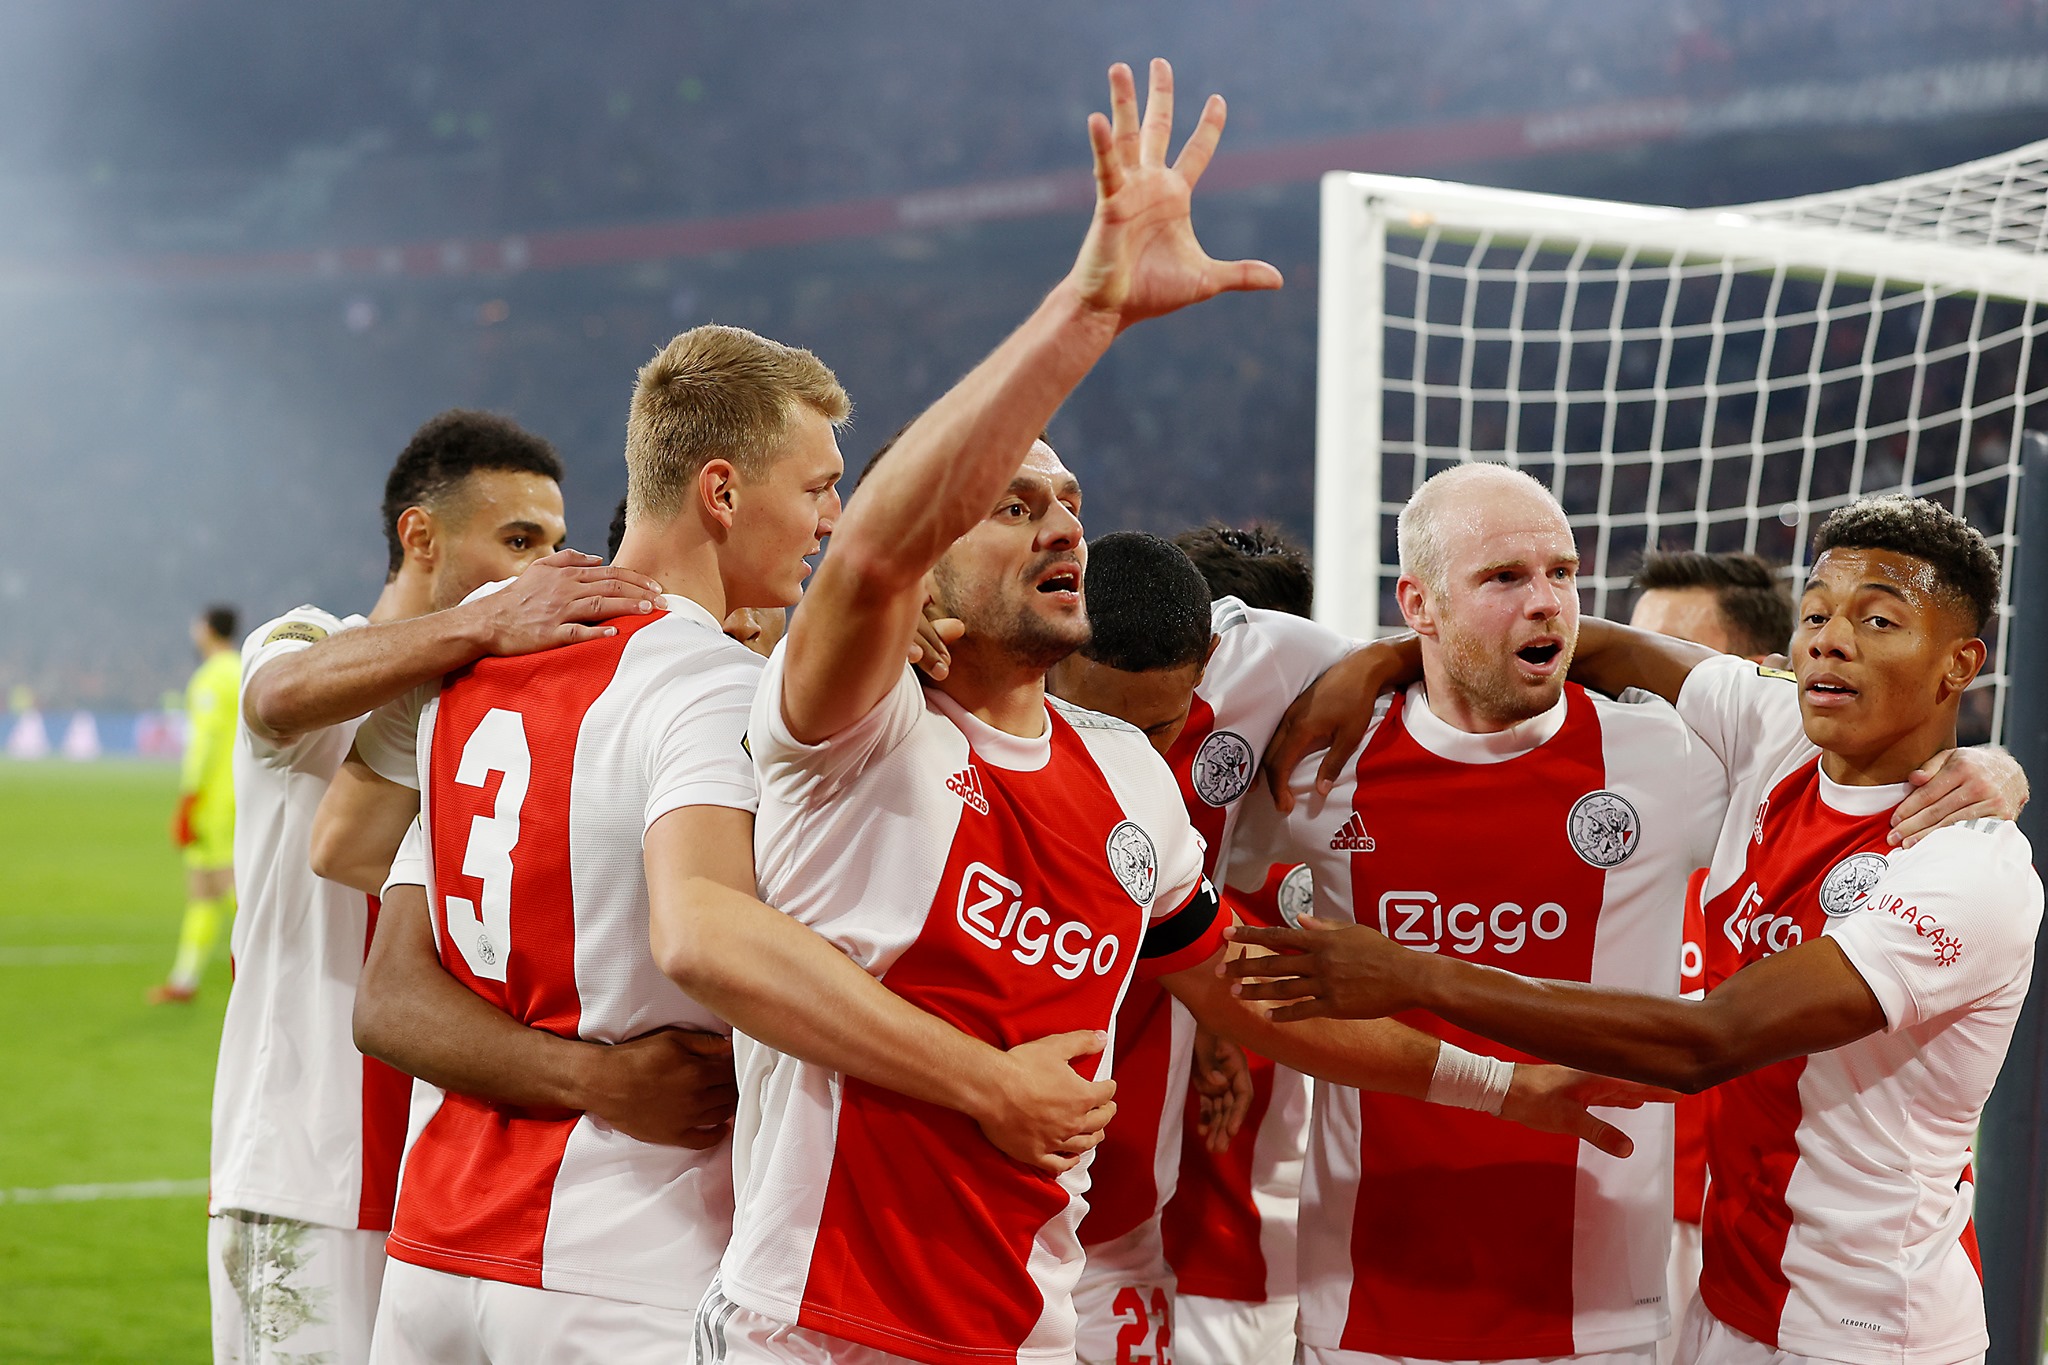 Ajax is best in the top 10 leagues on goals scored and conceded: De Boer claims the team is third-best in Europe 